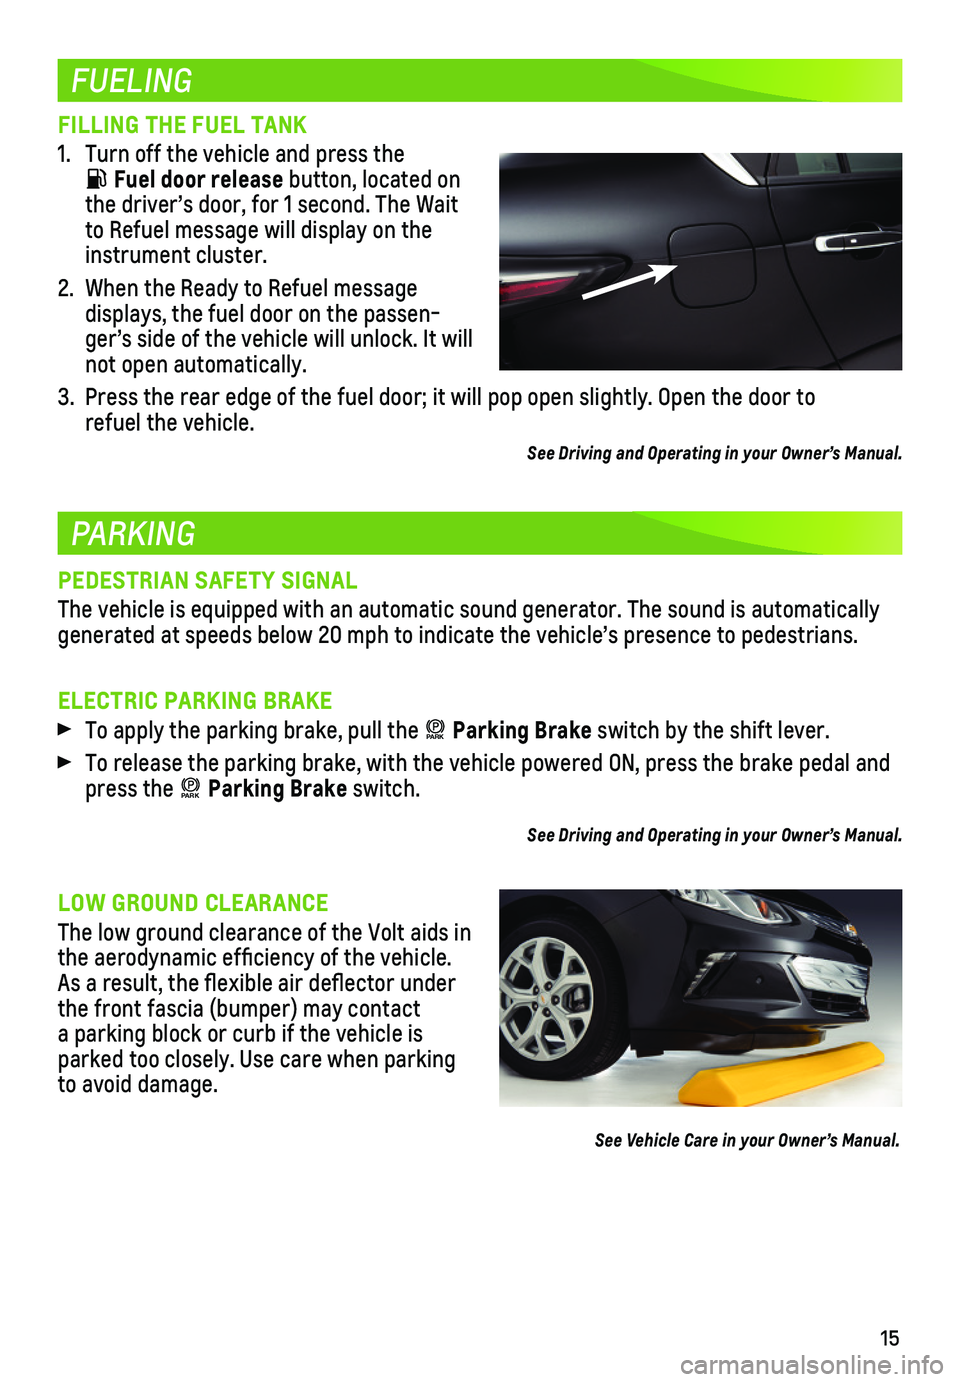 CHEVROLET VOLT 2018  Get To Know Guide 15
FUELING
PARKING
FILLING THE FUEL TANK
1. Turn off the vehicle and press the  
 Fuel door release button, located on the driver’s door, for 1 second. The Wait to Refuel message will display on the